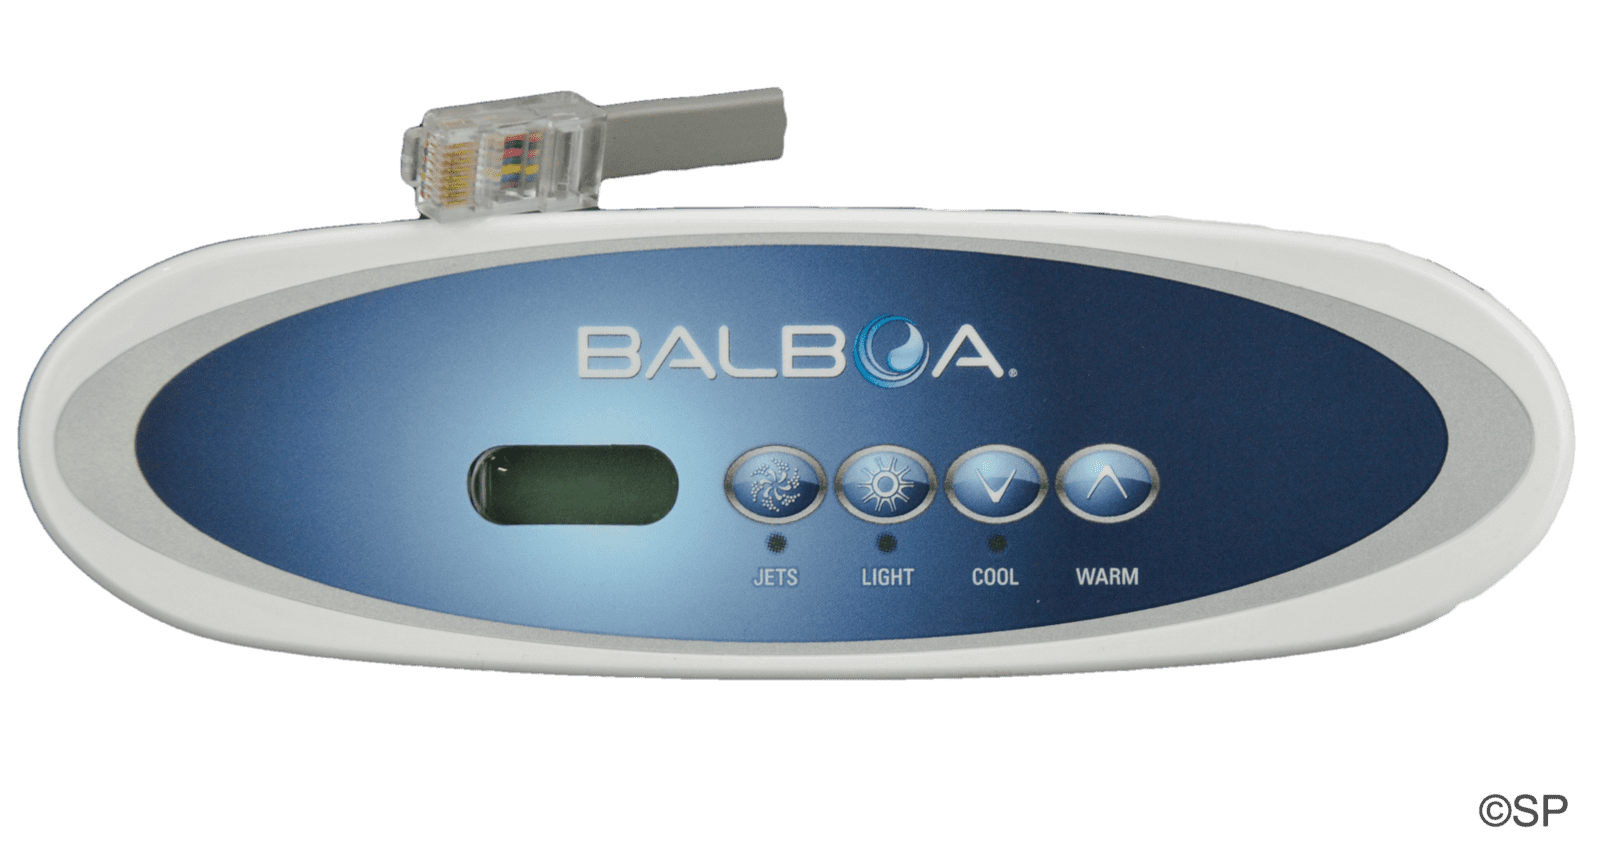 Balboa VL260 4 Button Oval Topside Panel LCD Jets Light Down Up - Product Image